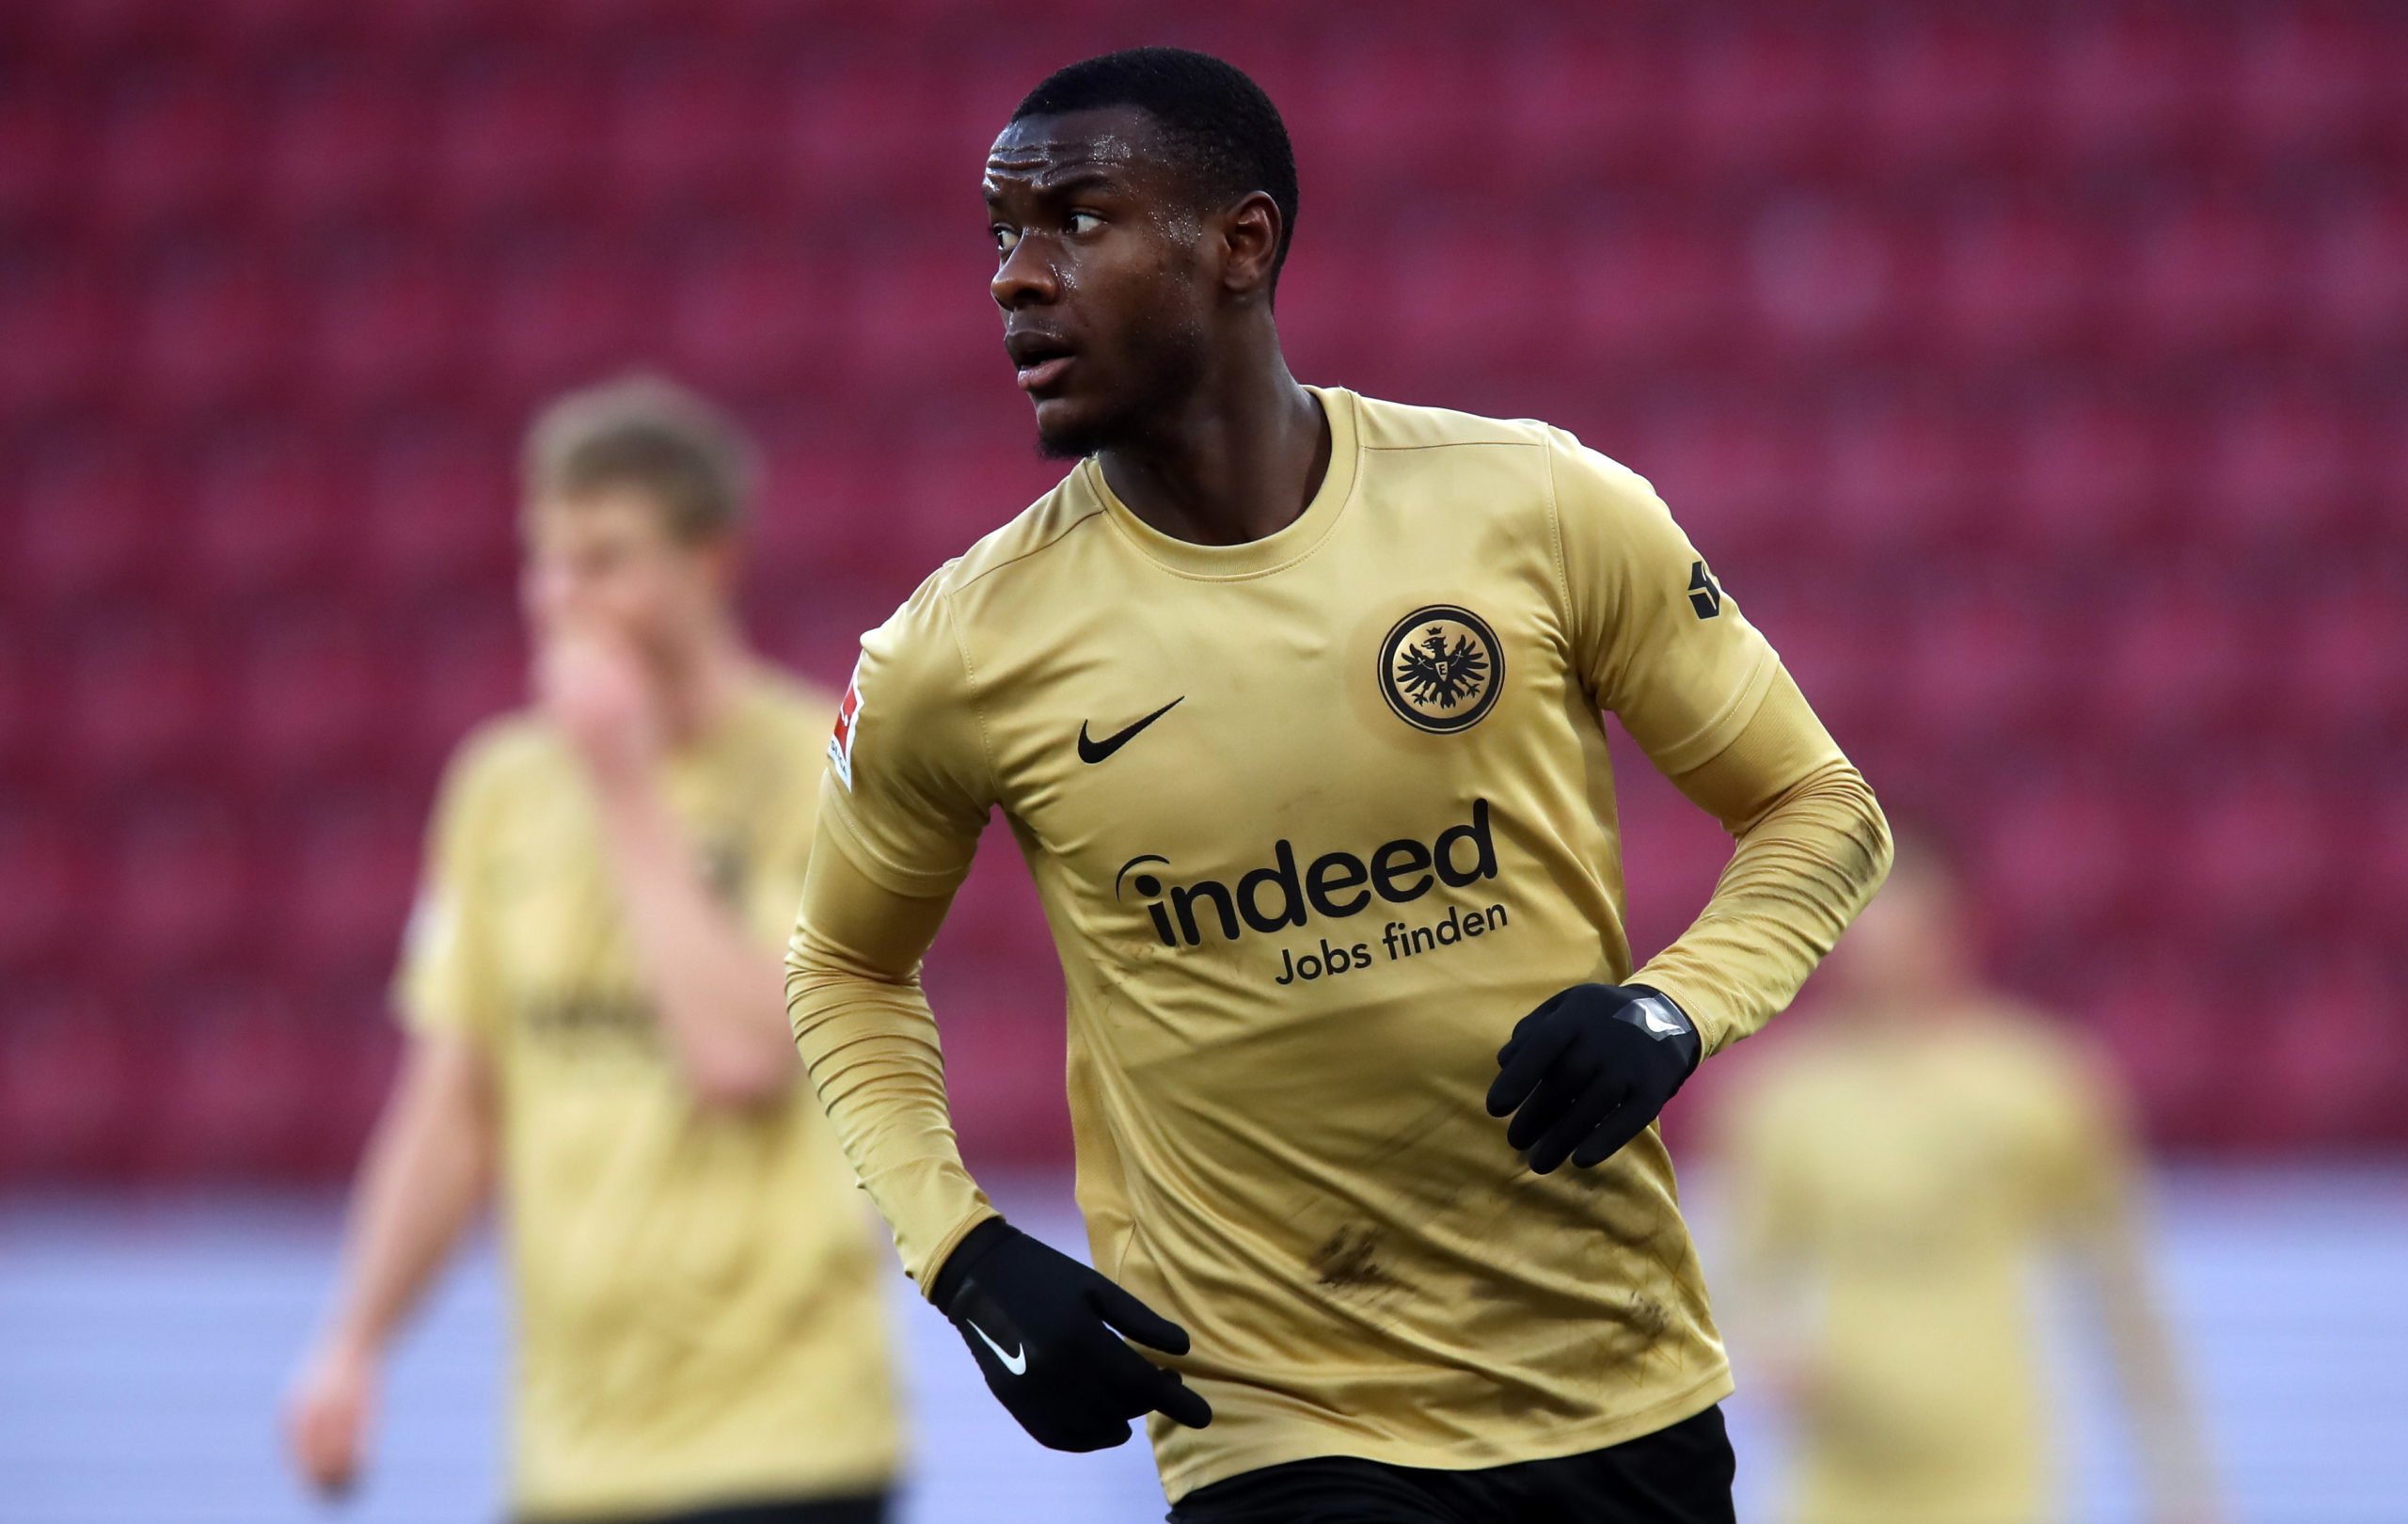 Arsenal have joined the race to sign Evan N'Dicka - One for the future?